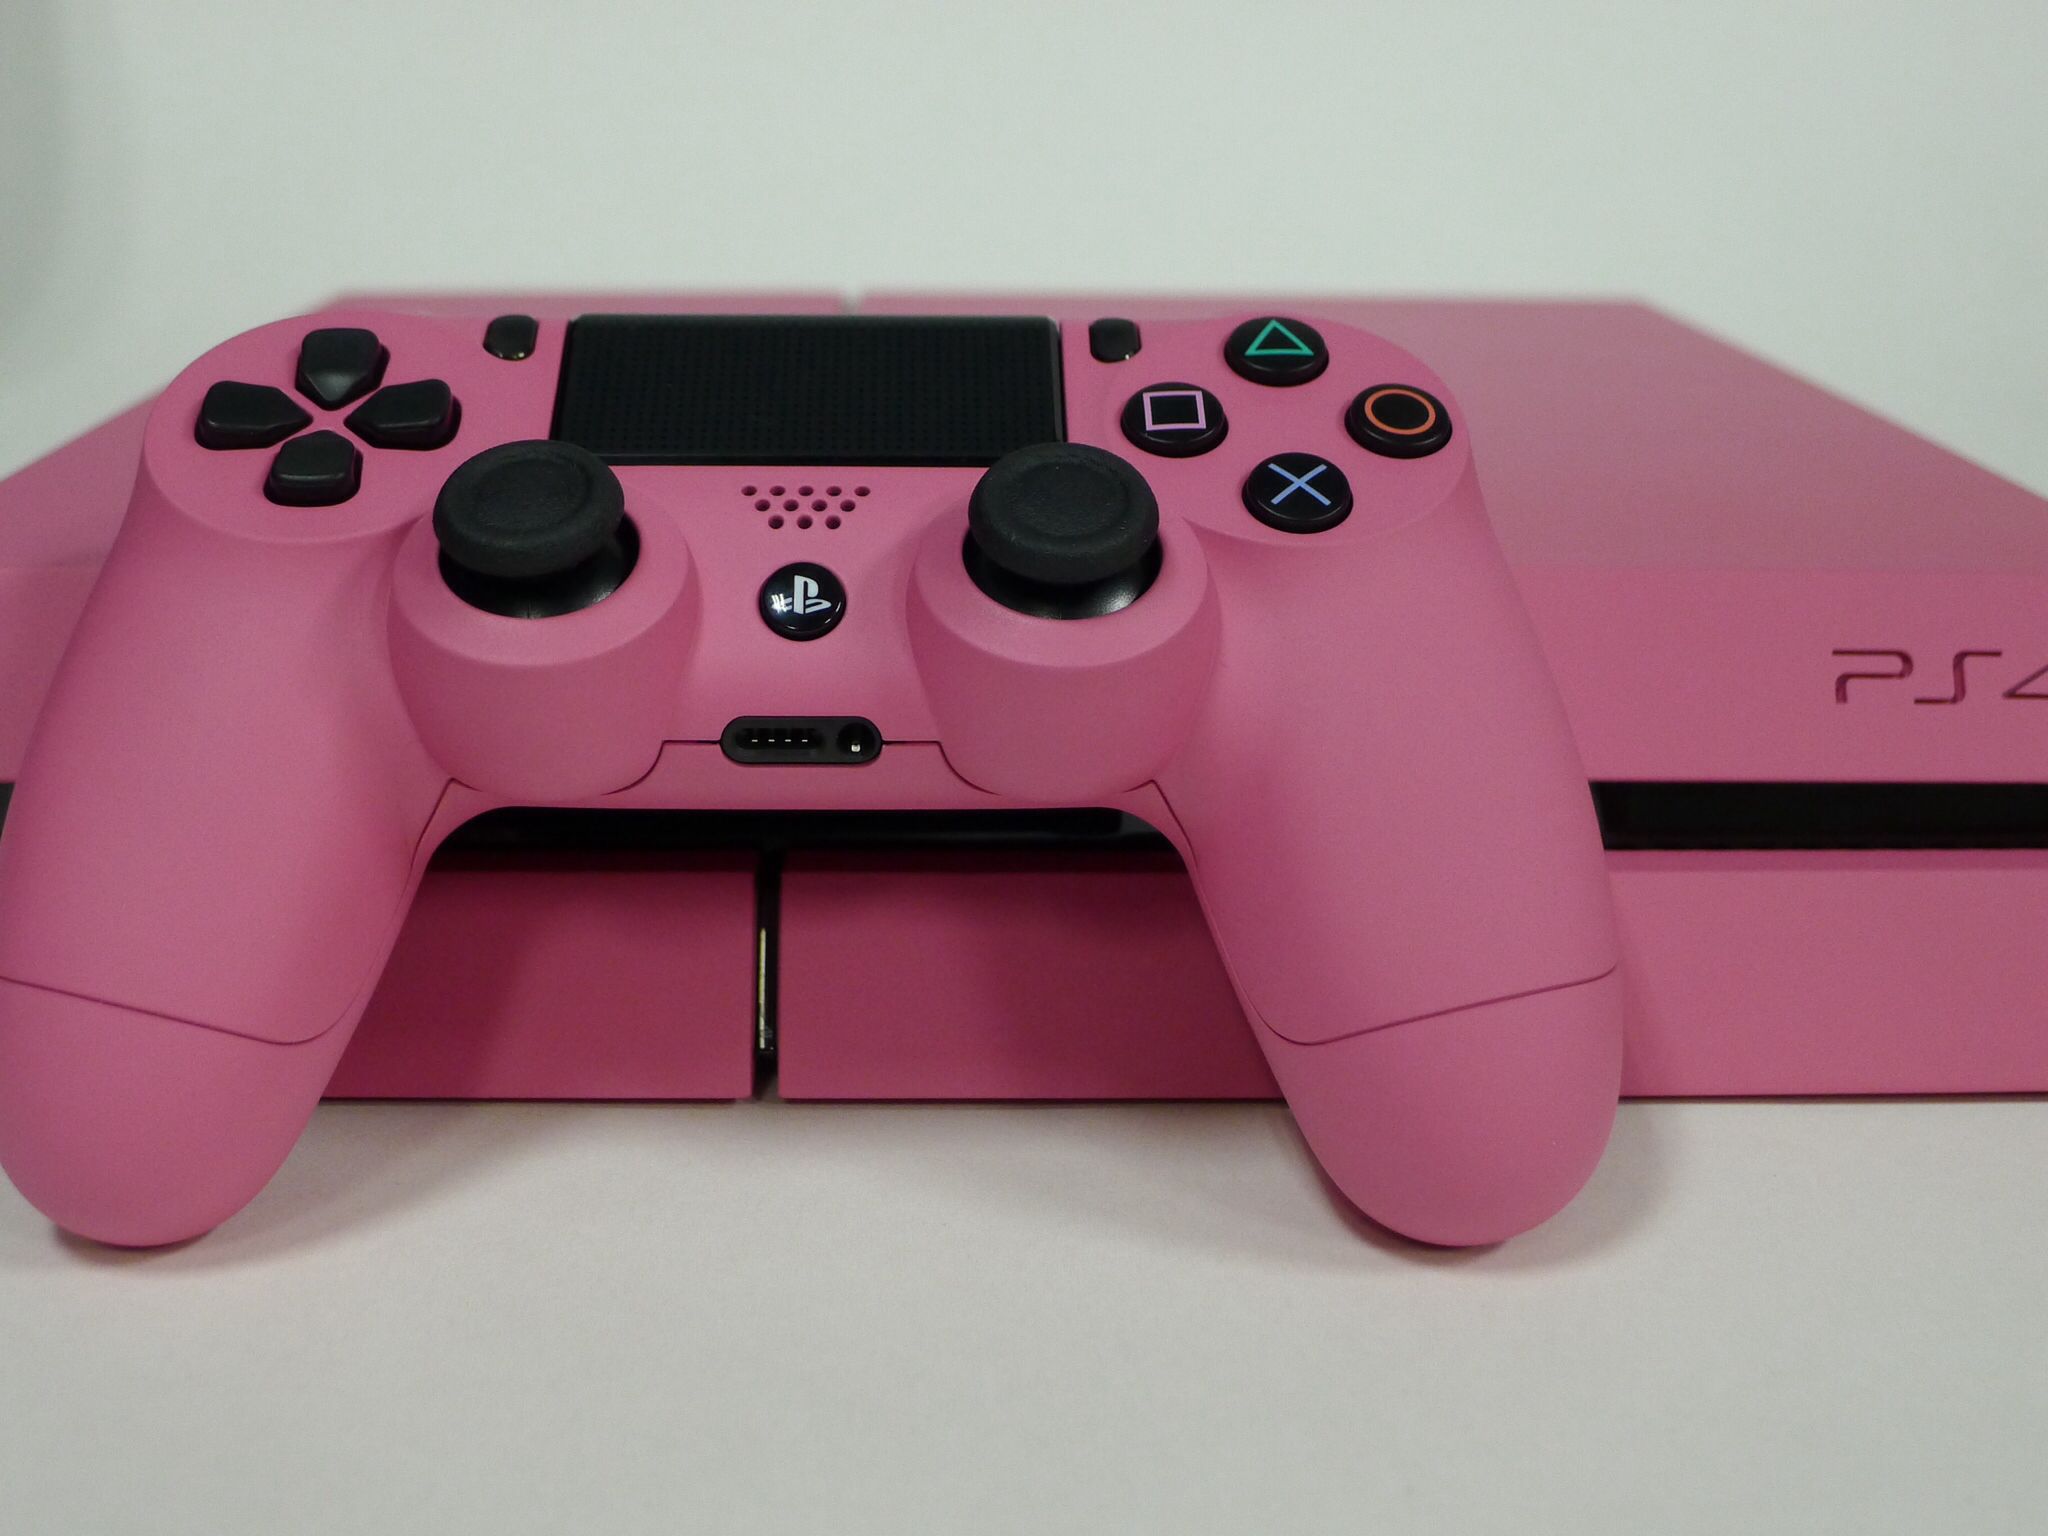 When your favorite color is pink, go all out! #custom #gaming #PS4